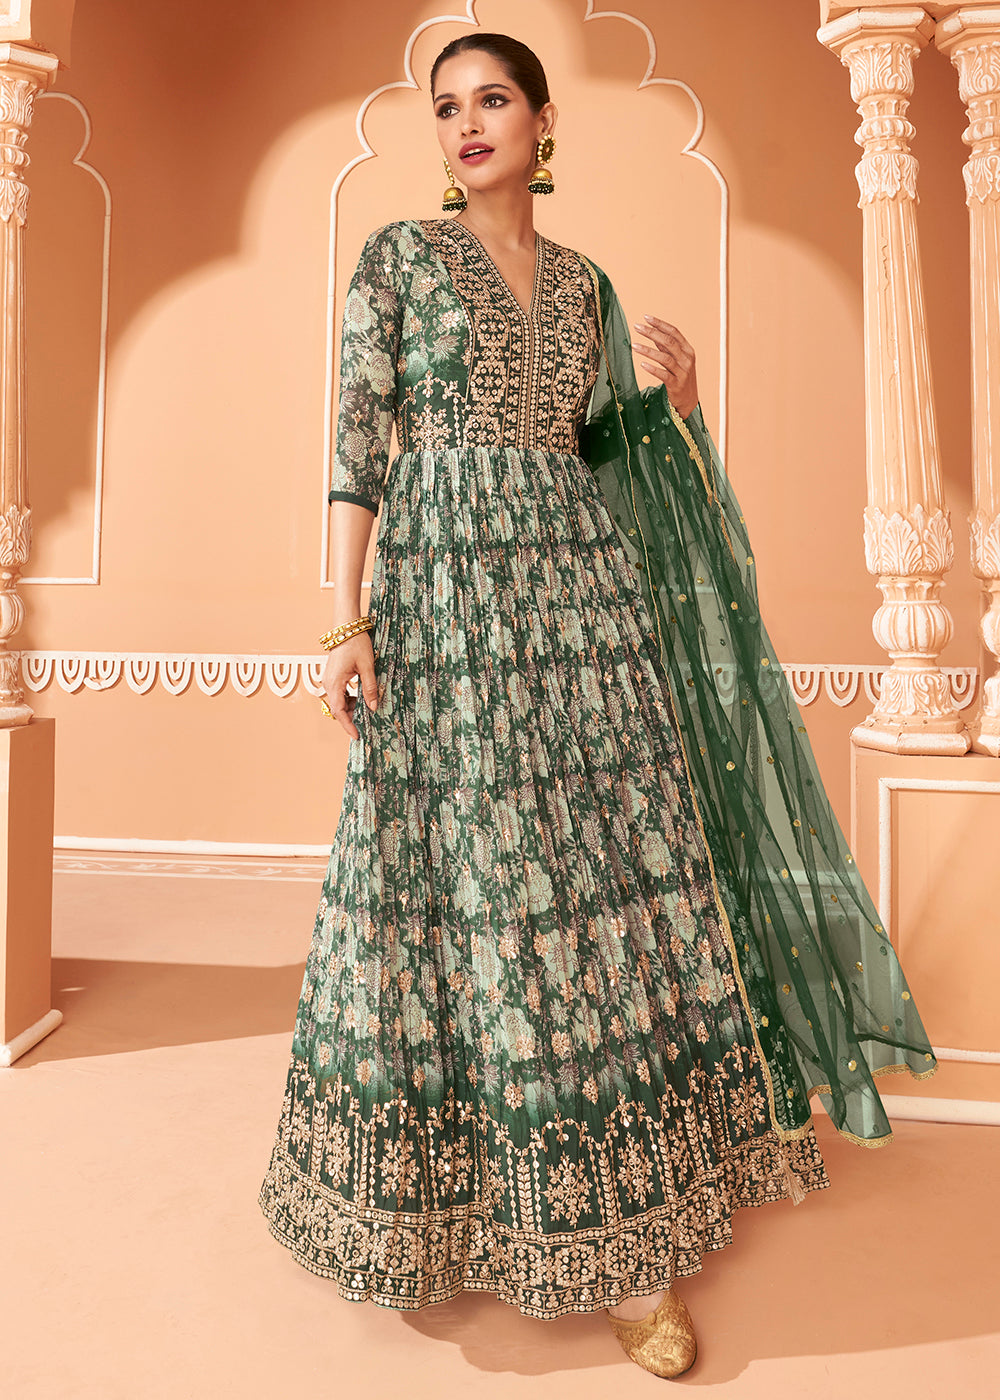 Buy Now Wedding Wear Floral Embroidered Green Anarkali Suit Online in USA, UK, Australia, New Zealand, Canada & Worldwide at Empress Clothing.